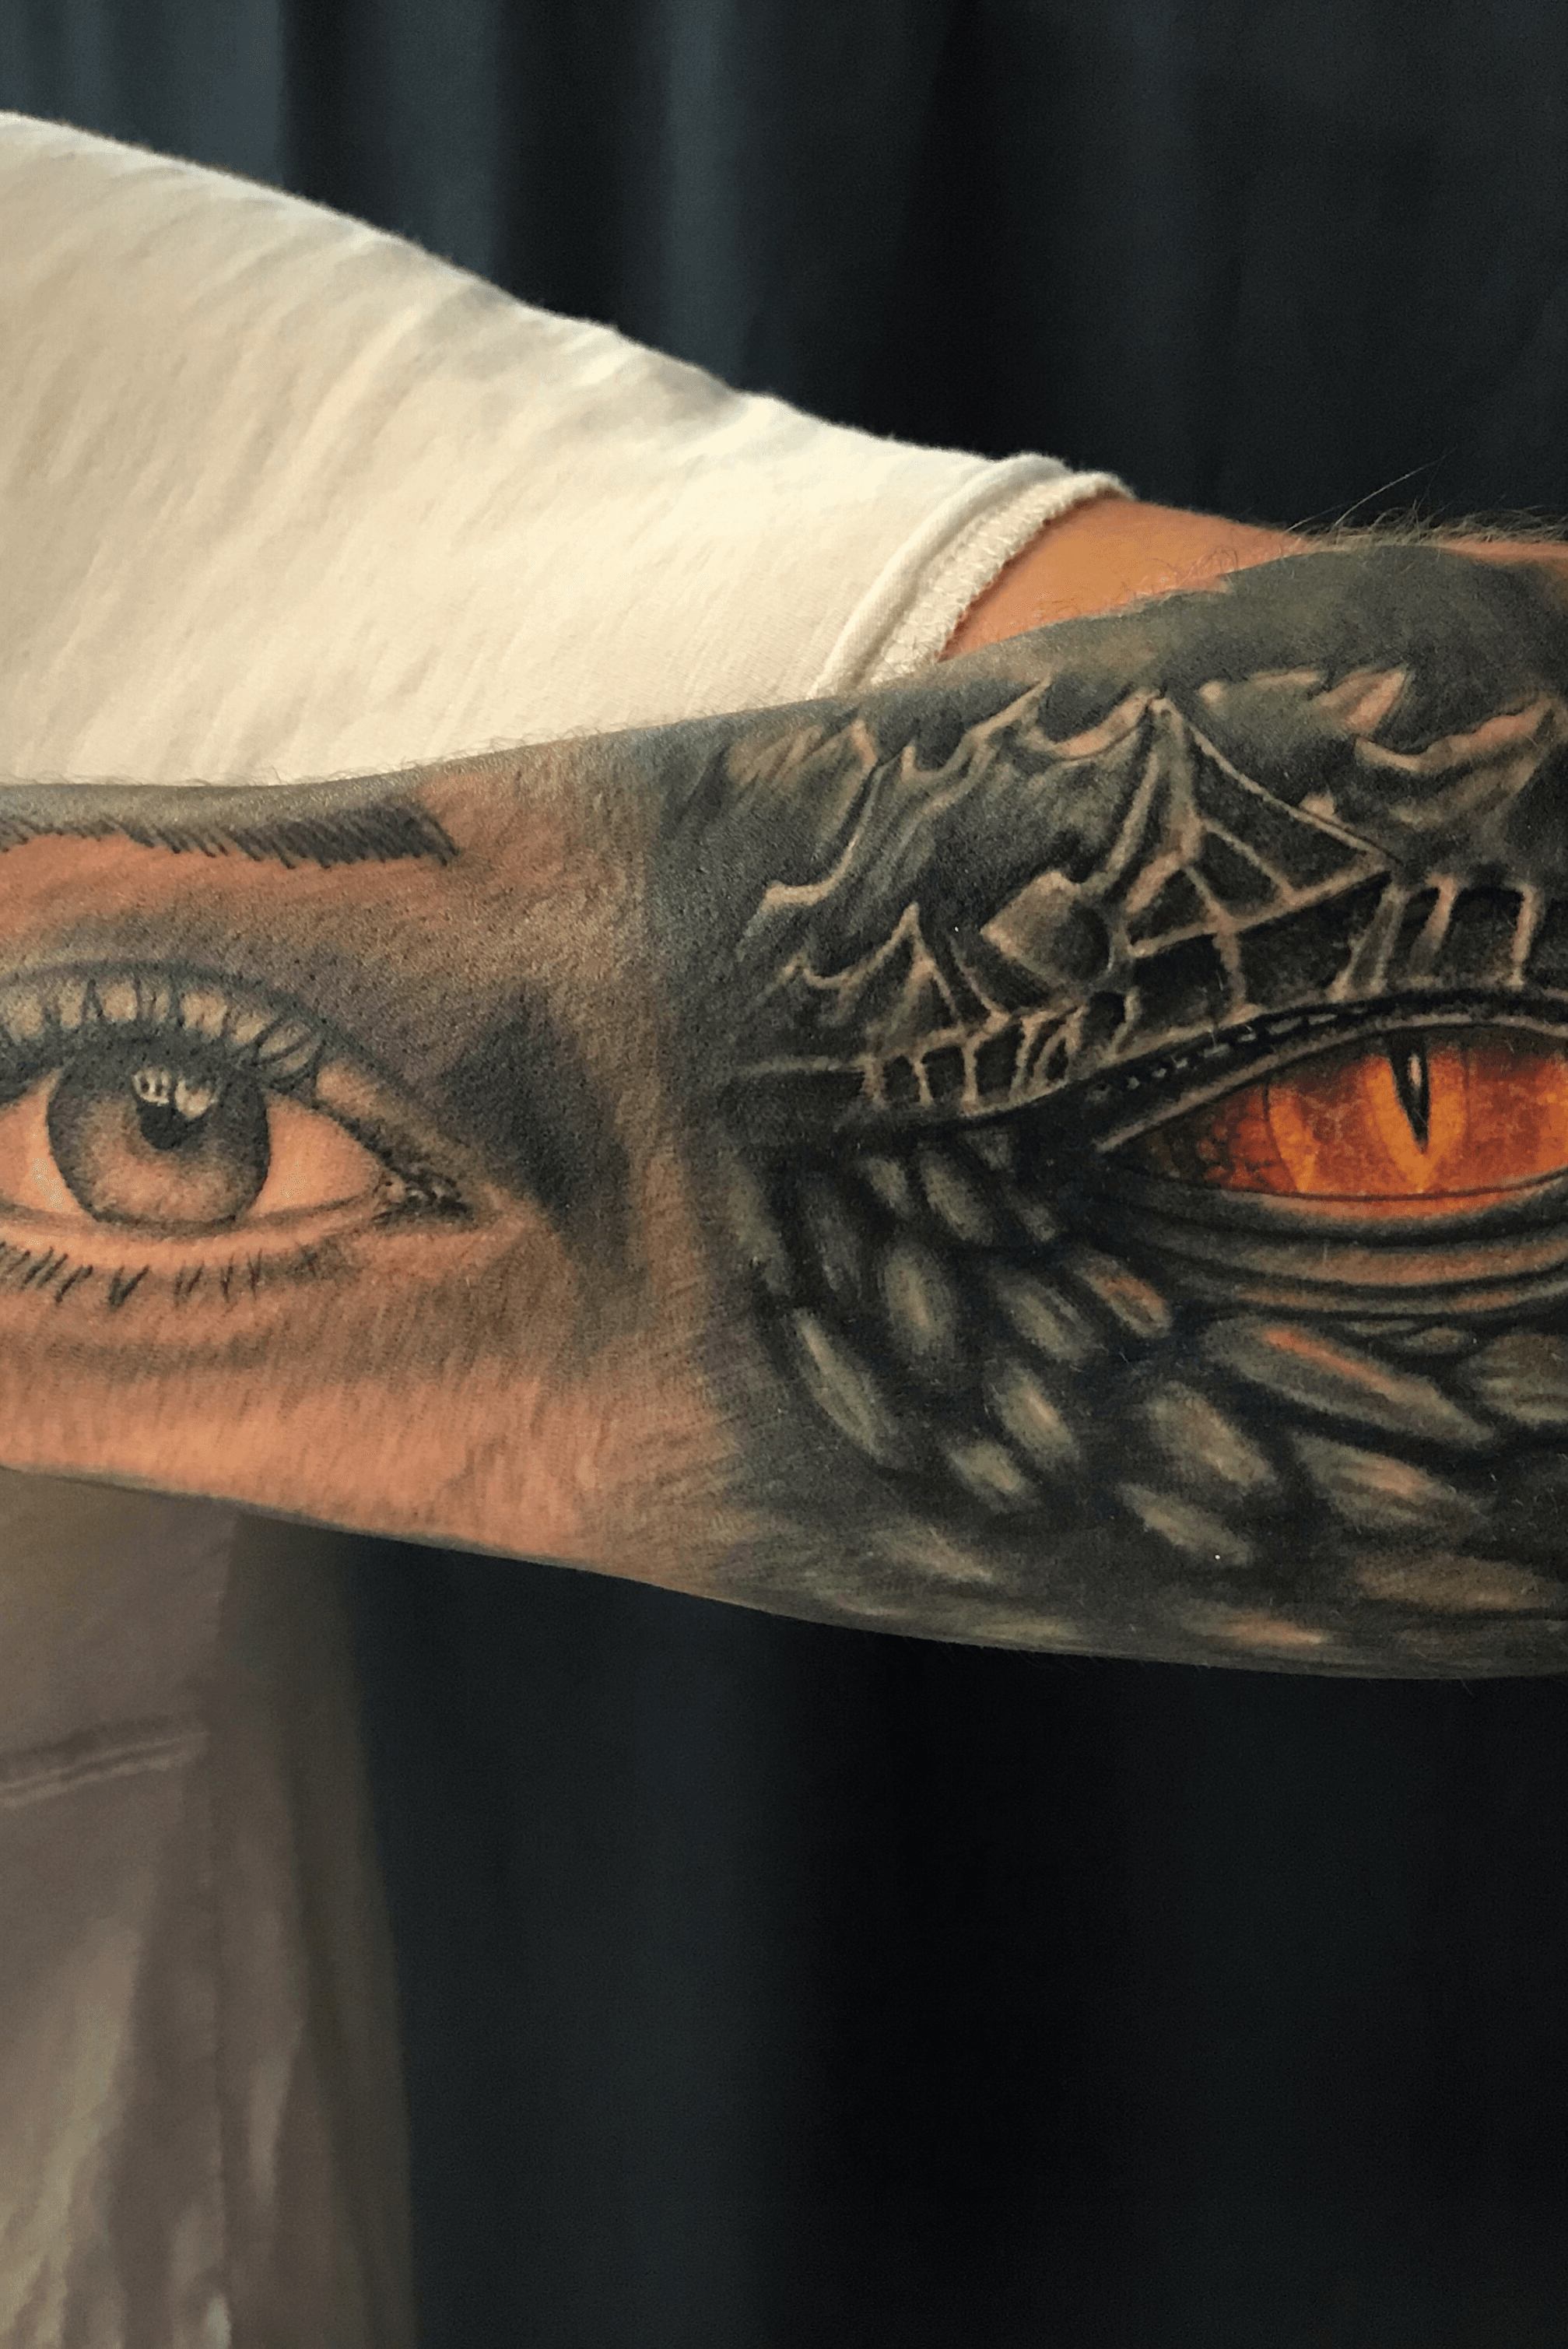 Buy Dragon Eye With Skull Temporary Sleeve Tattoos Online in India  Etsy